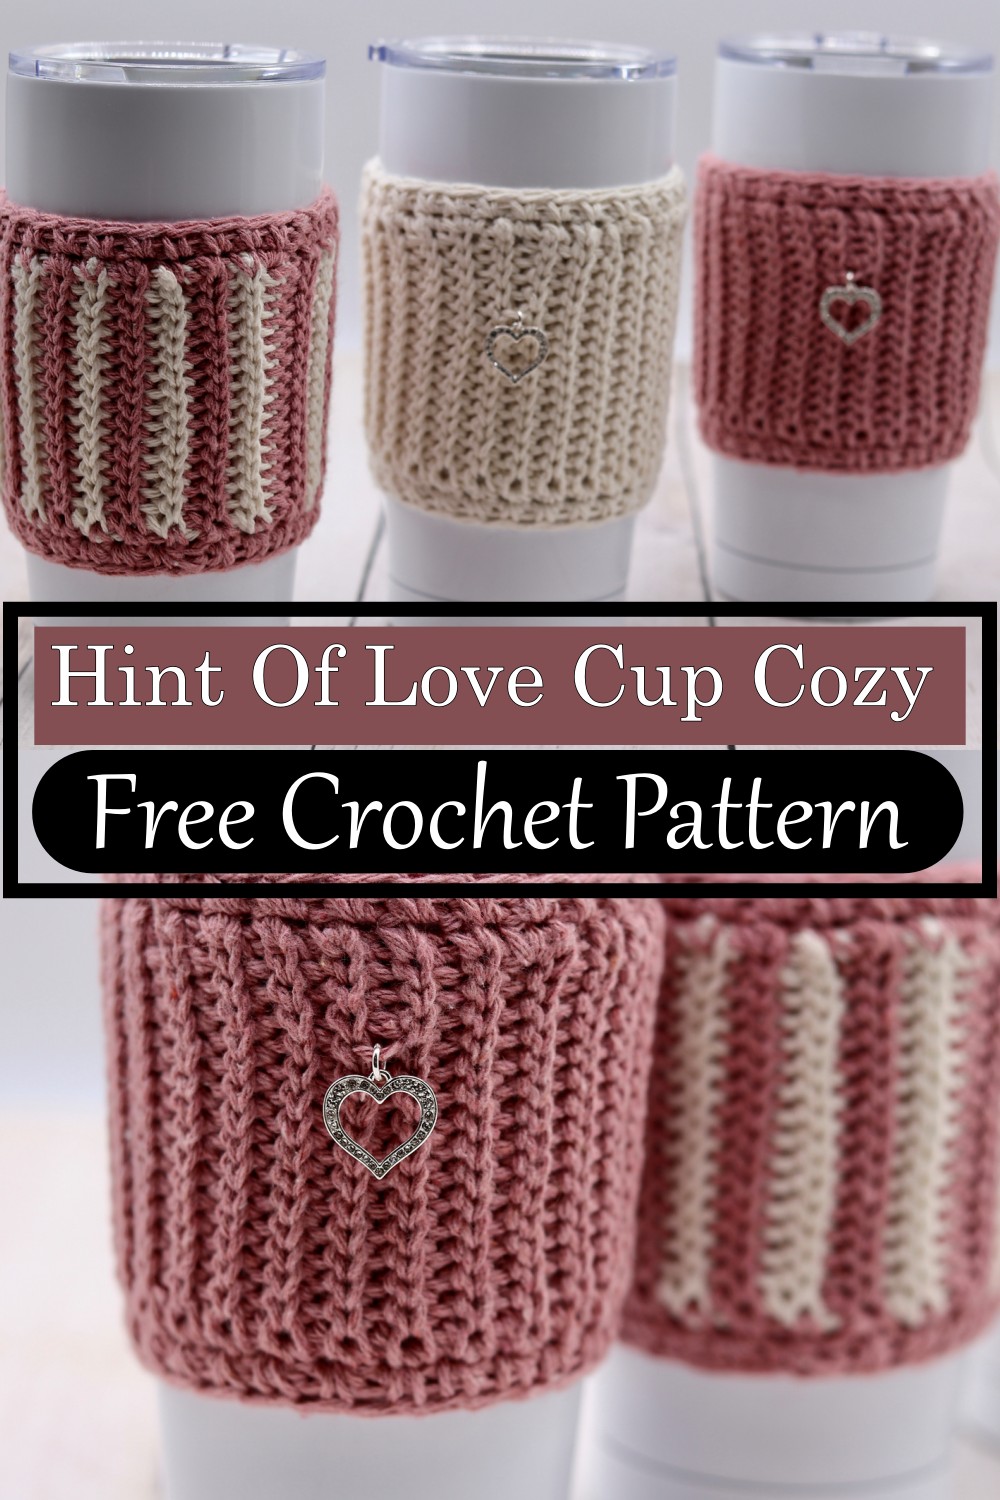 Hint Of Love Cup Cozy